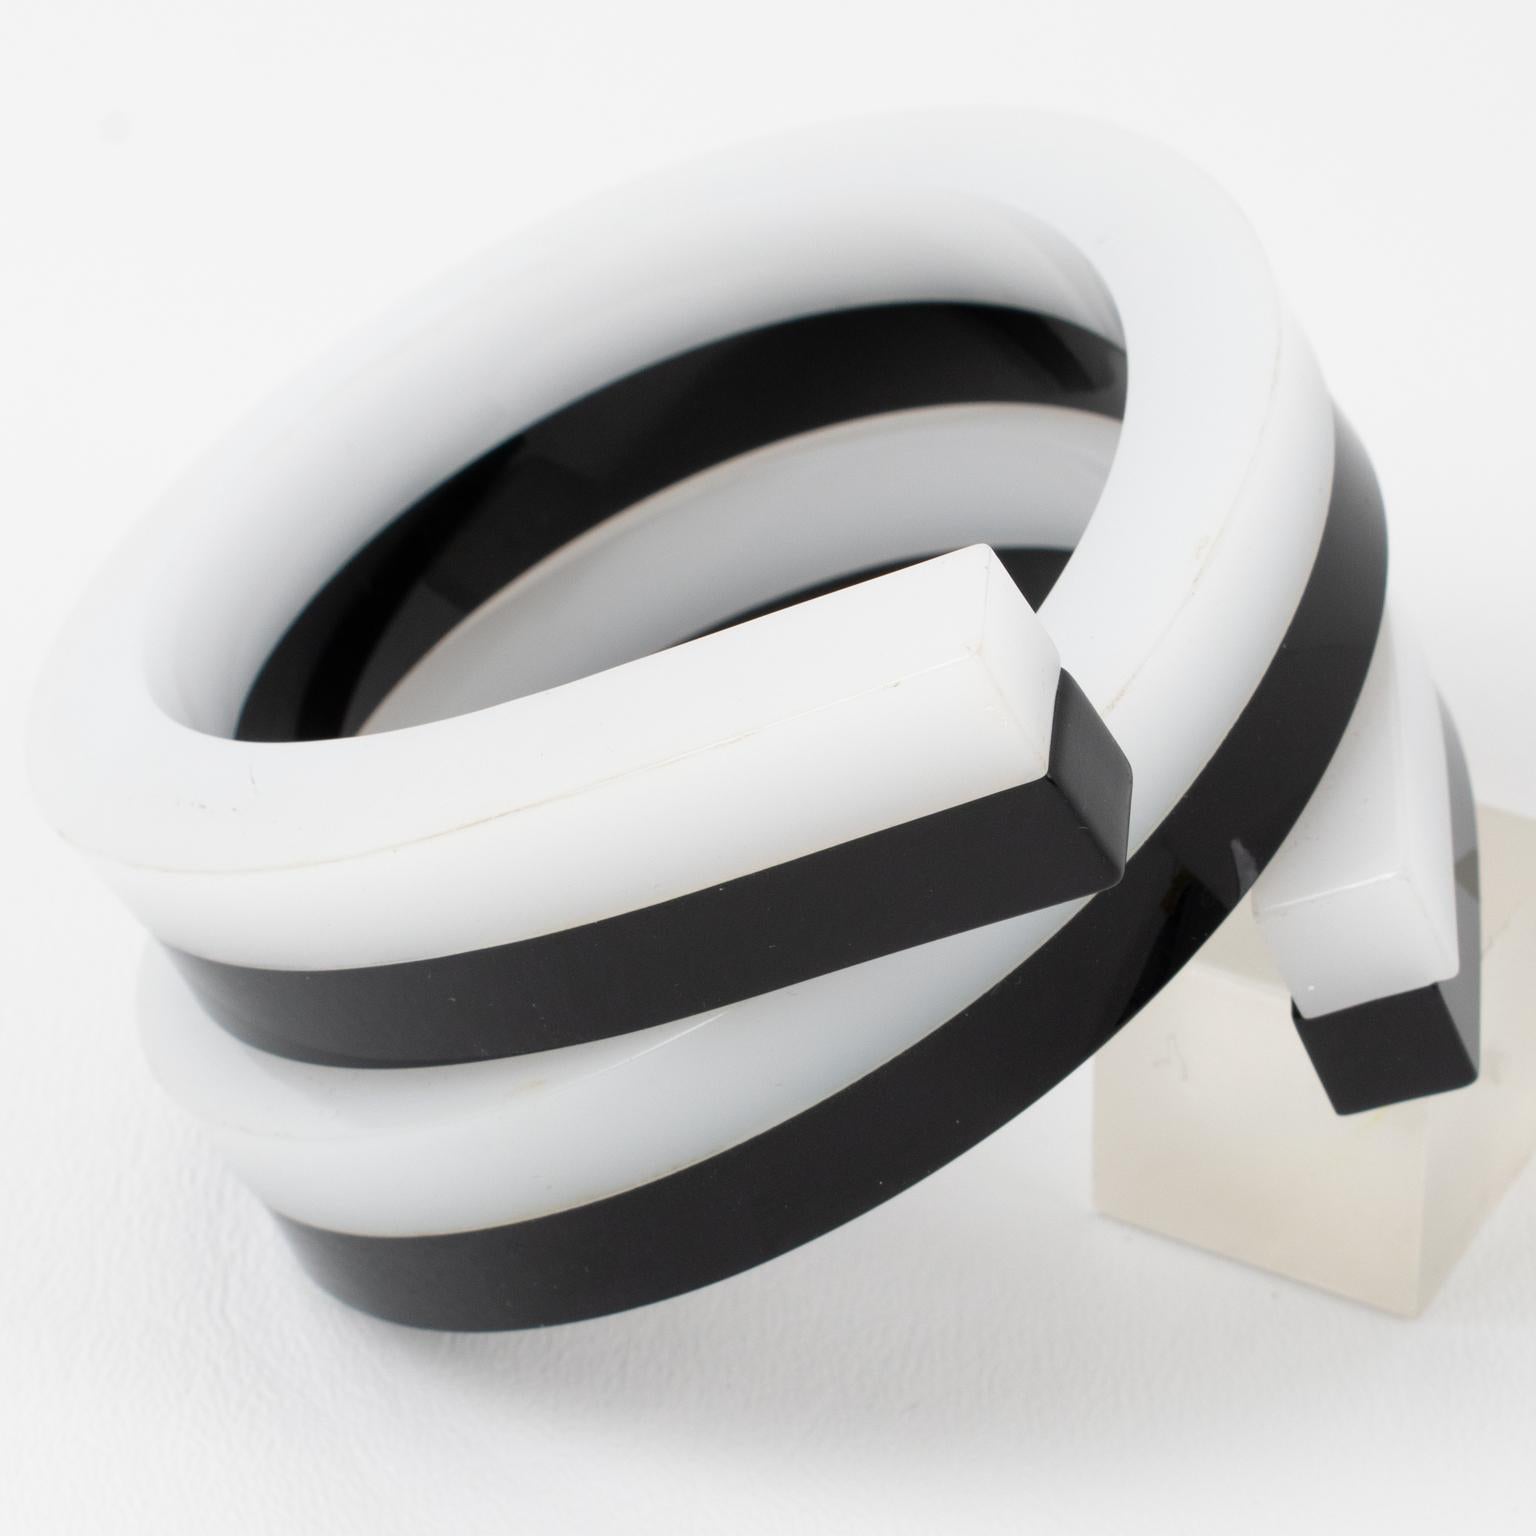 This stunning oversized Space Age sculptural Lucite bracelet bangle features a chunky coiled-wrapped shape with squared 